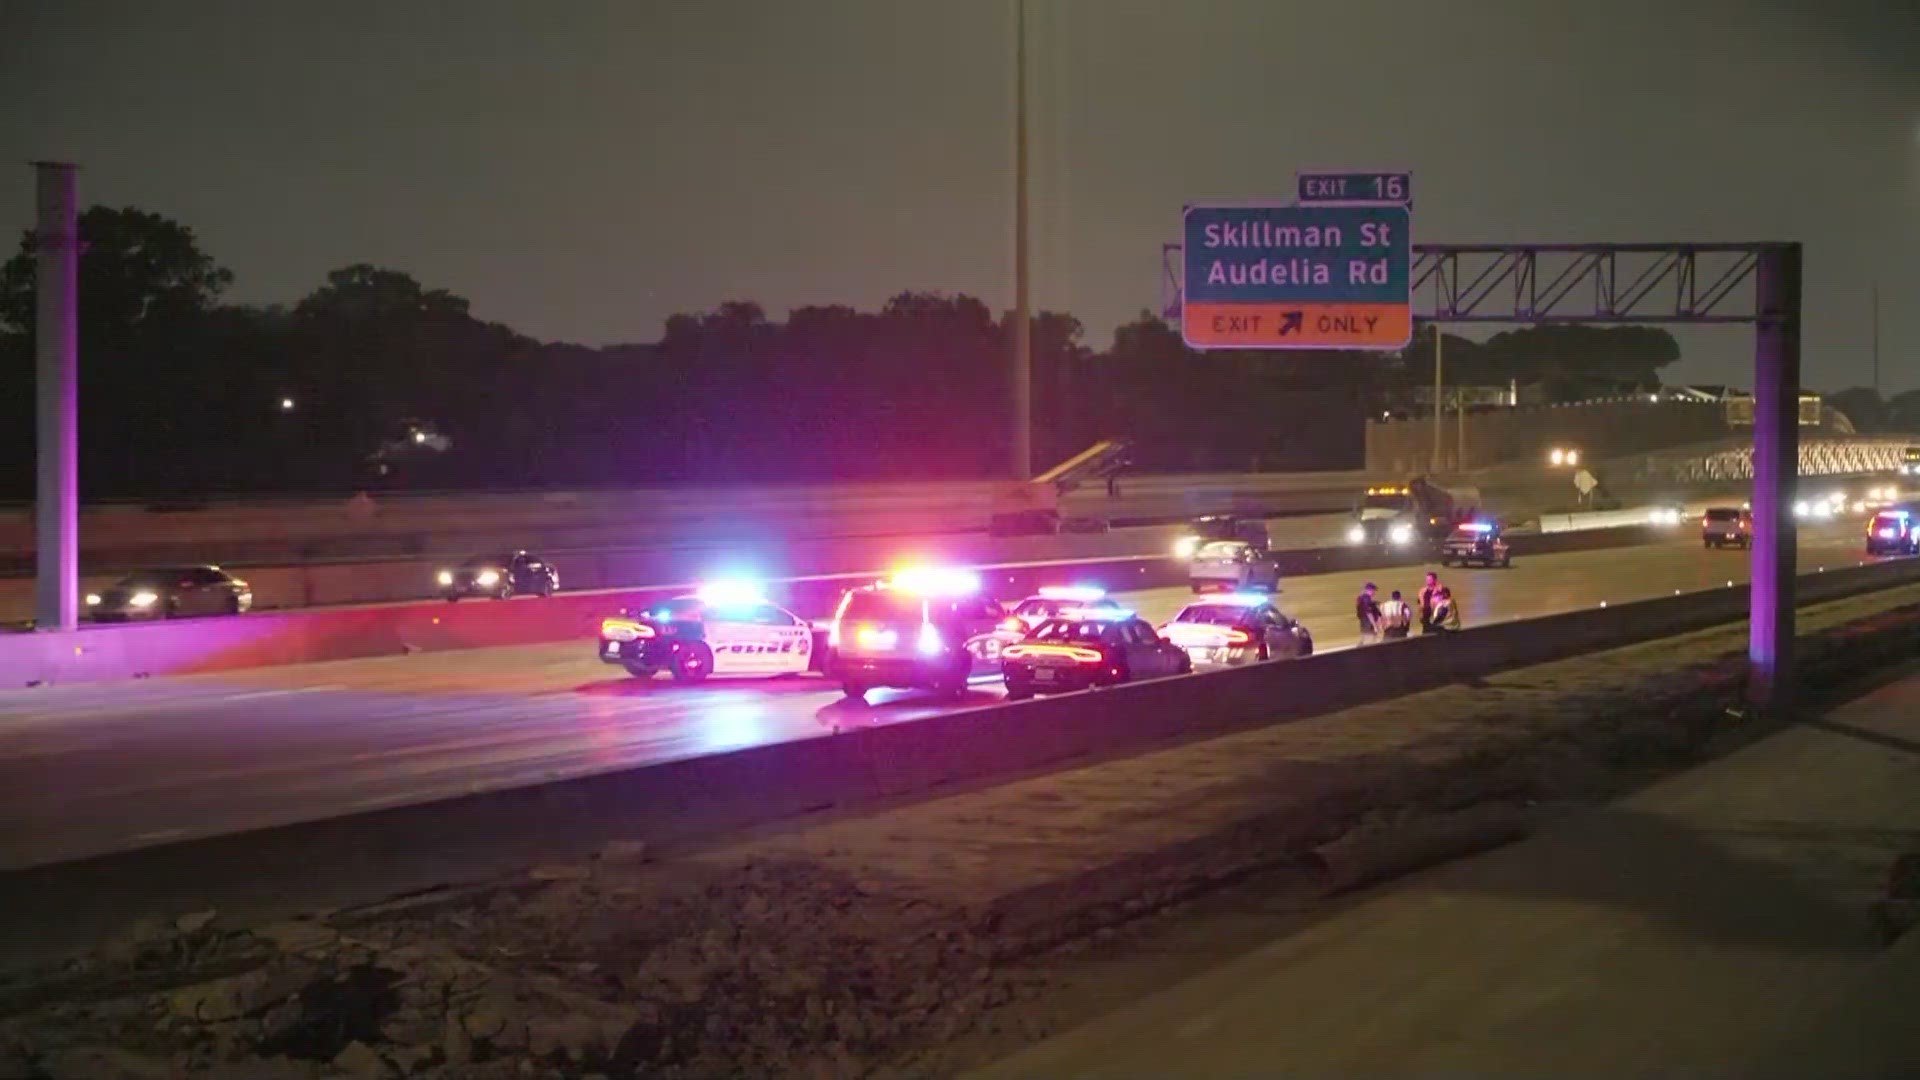 Police say the crash was reported on 635 near Audelia Road at about 1 a.m. Thursday.